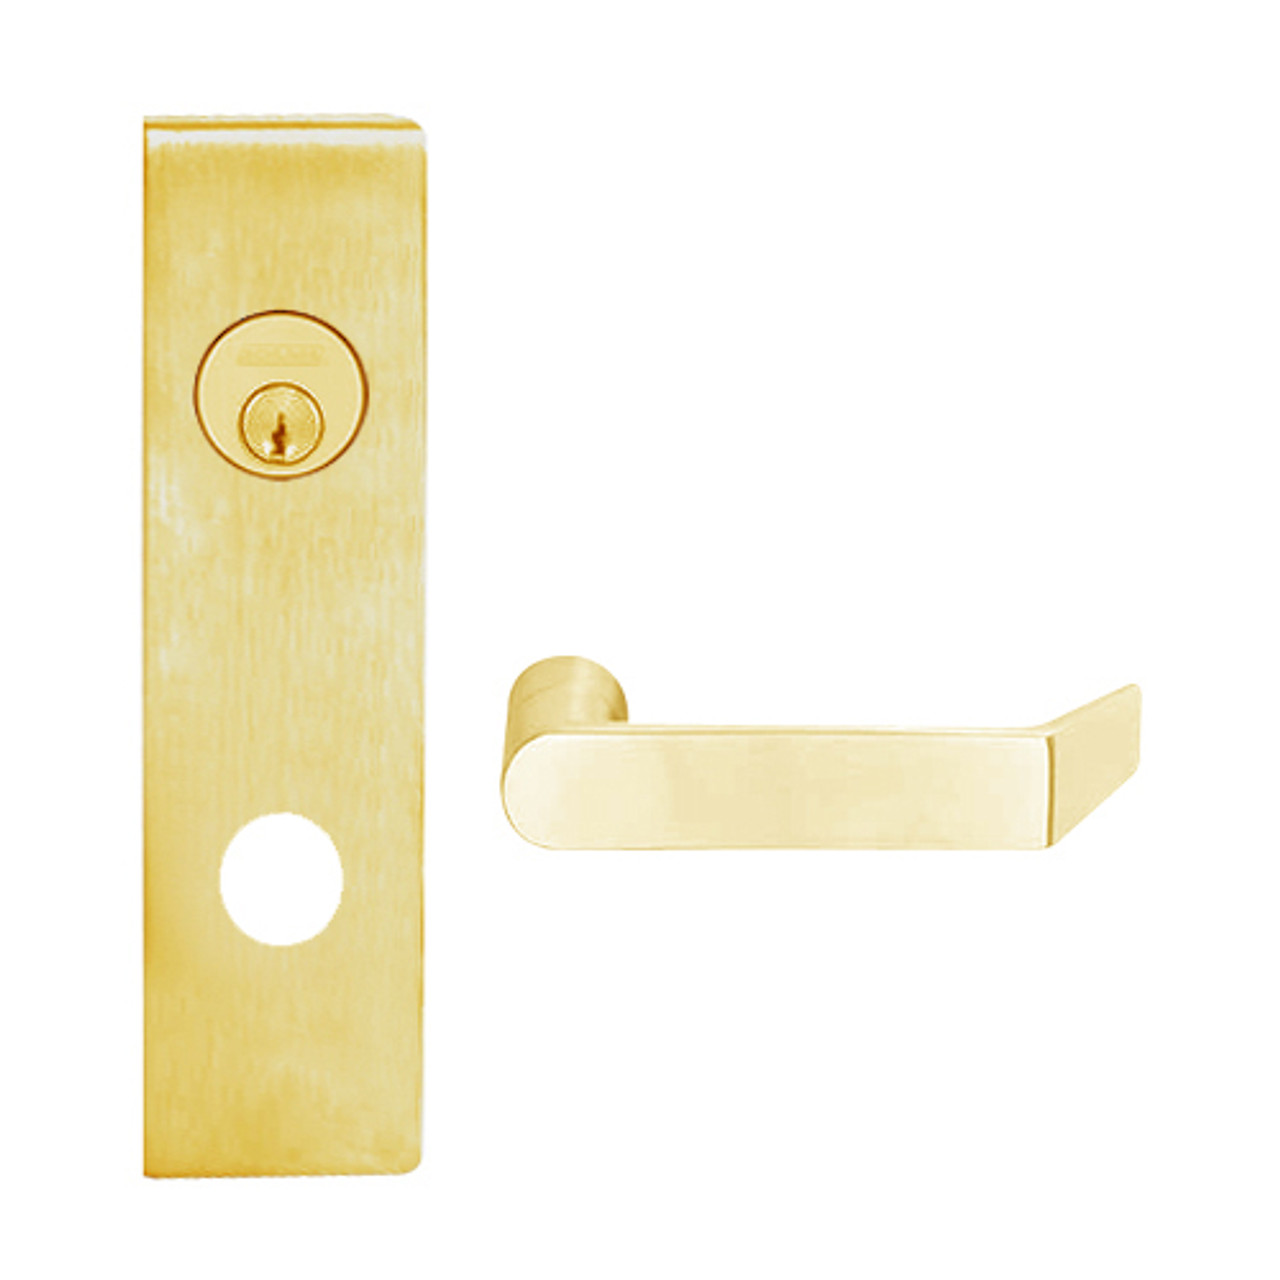 L9026P-06N-605 Schlage L Series Exit Lock with Cylinder Commercial Mortise Lock with 06 Cast Lever Design in Bright Brass